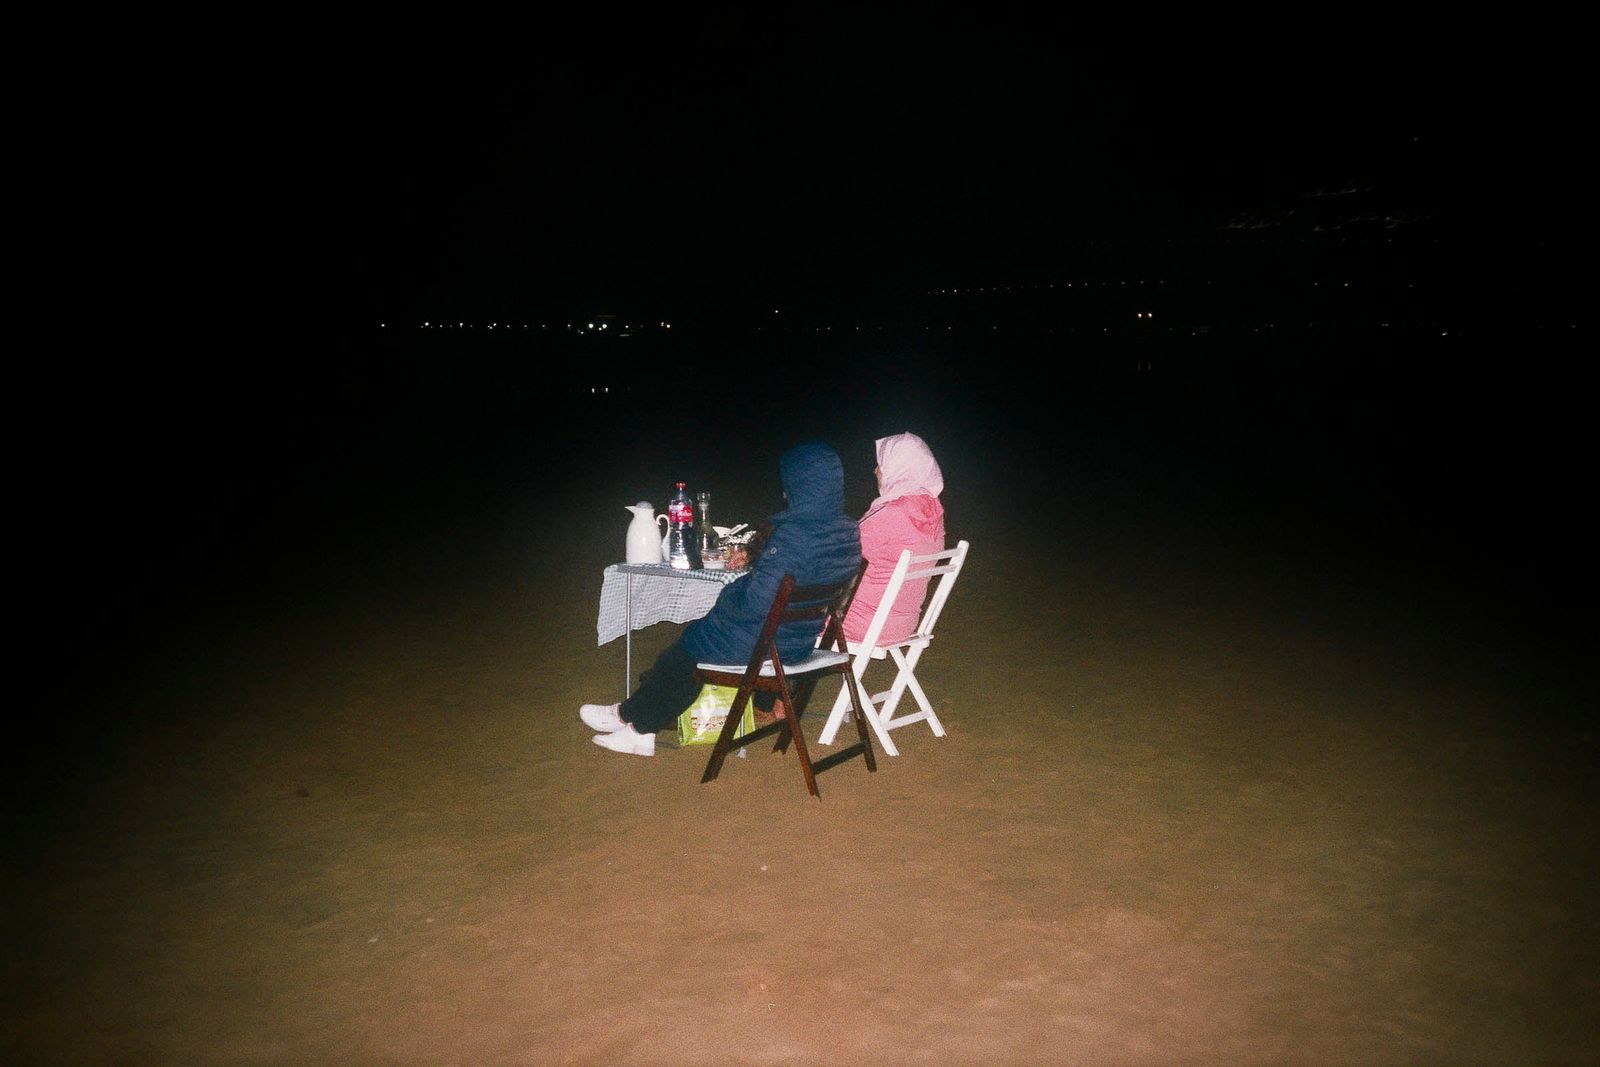 © Stella Laurenzi - Image from the Iftar photography project